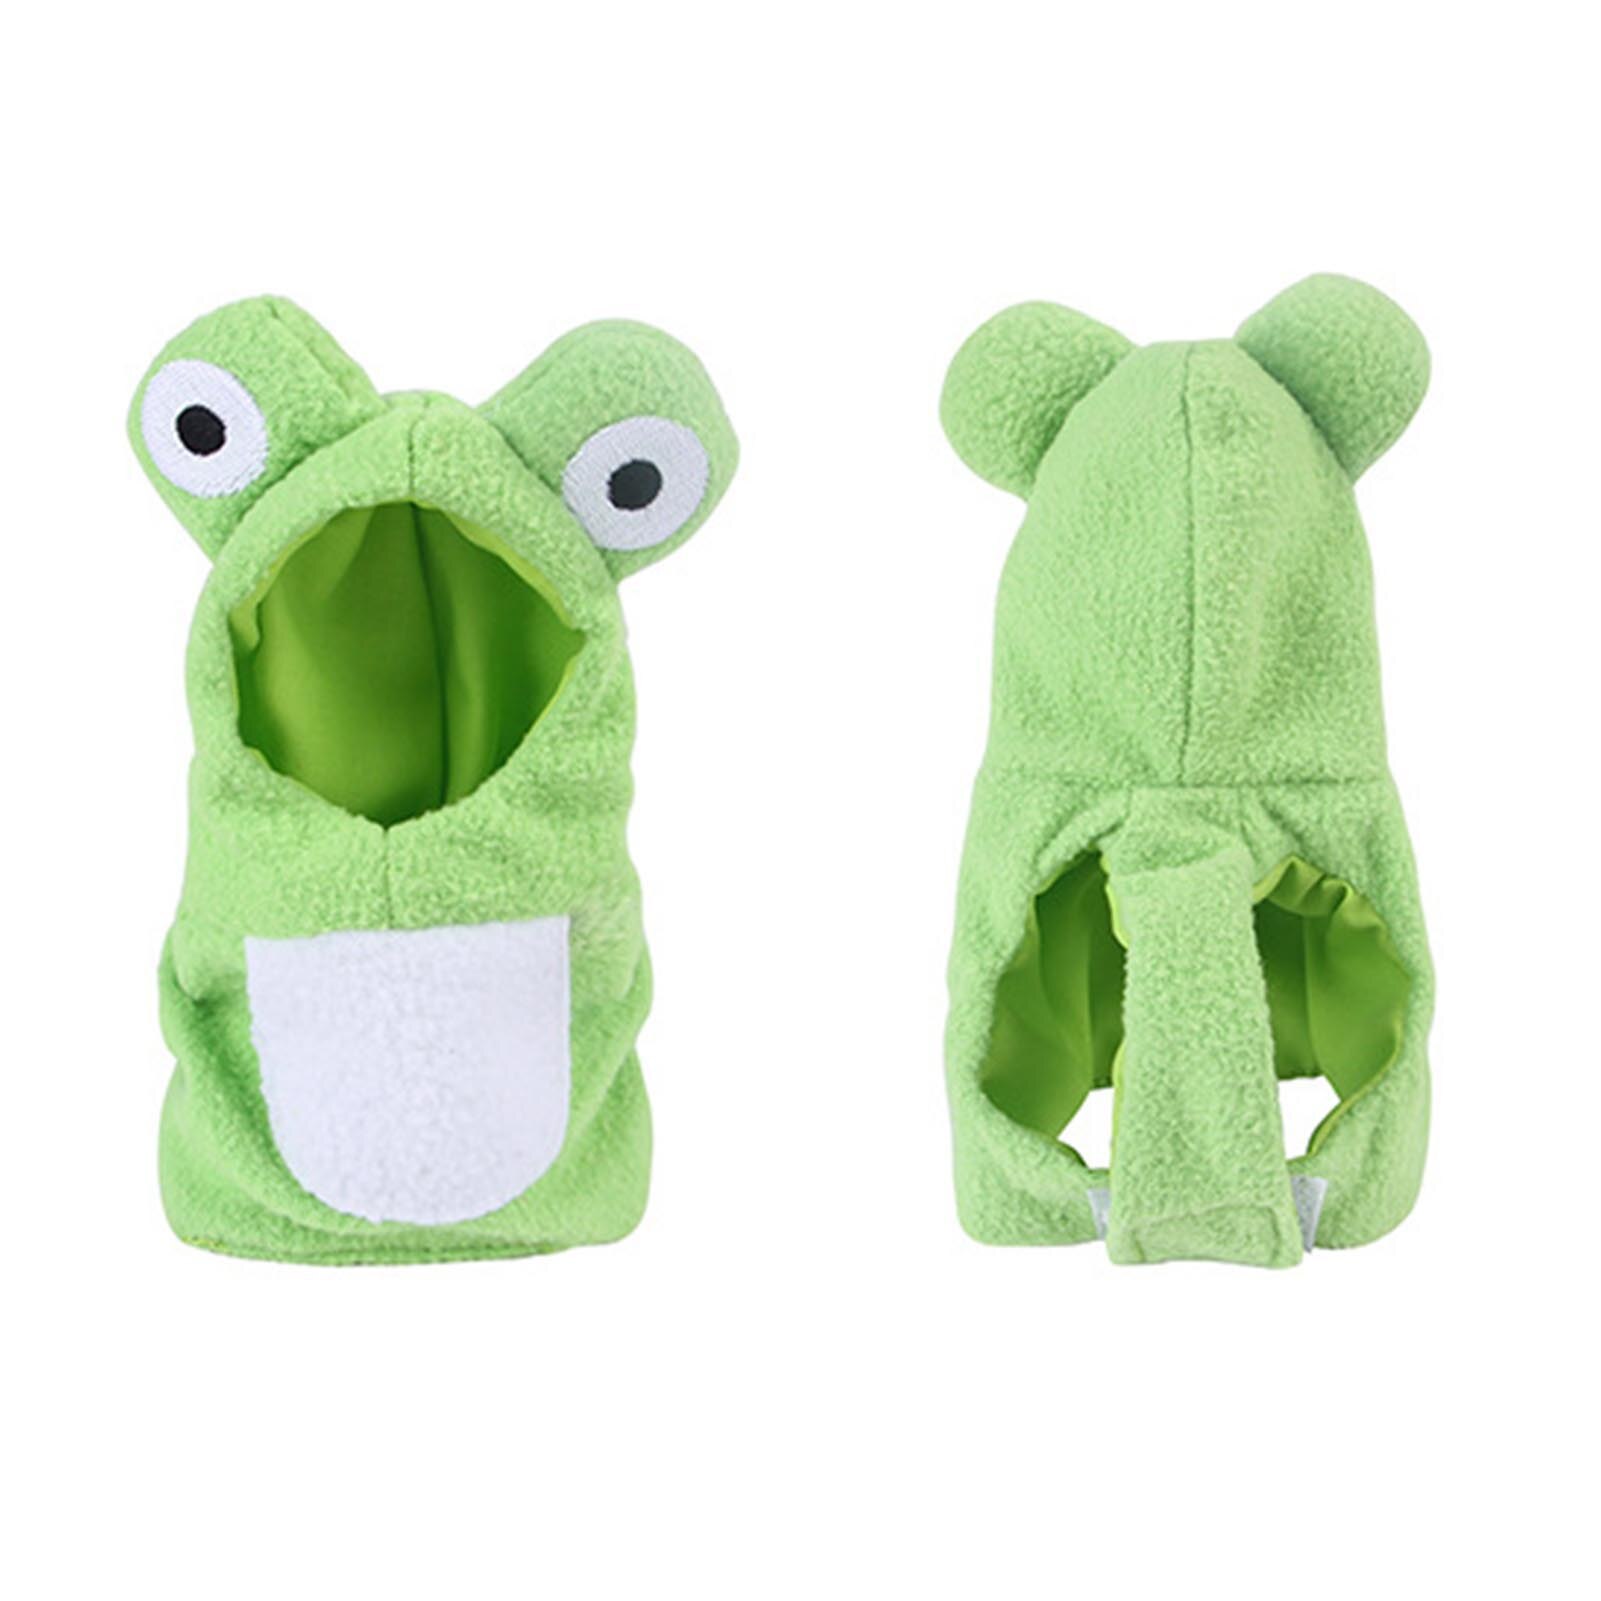 Bird's Hooded Winter Clothes Warm Hooded Coat Suit Frog Shape Cute Pet Parrot Outfit Winter Coat Warm Cozy Hooded Bird Clothes: S